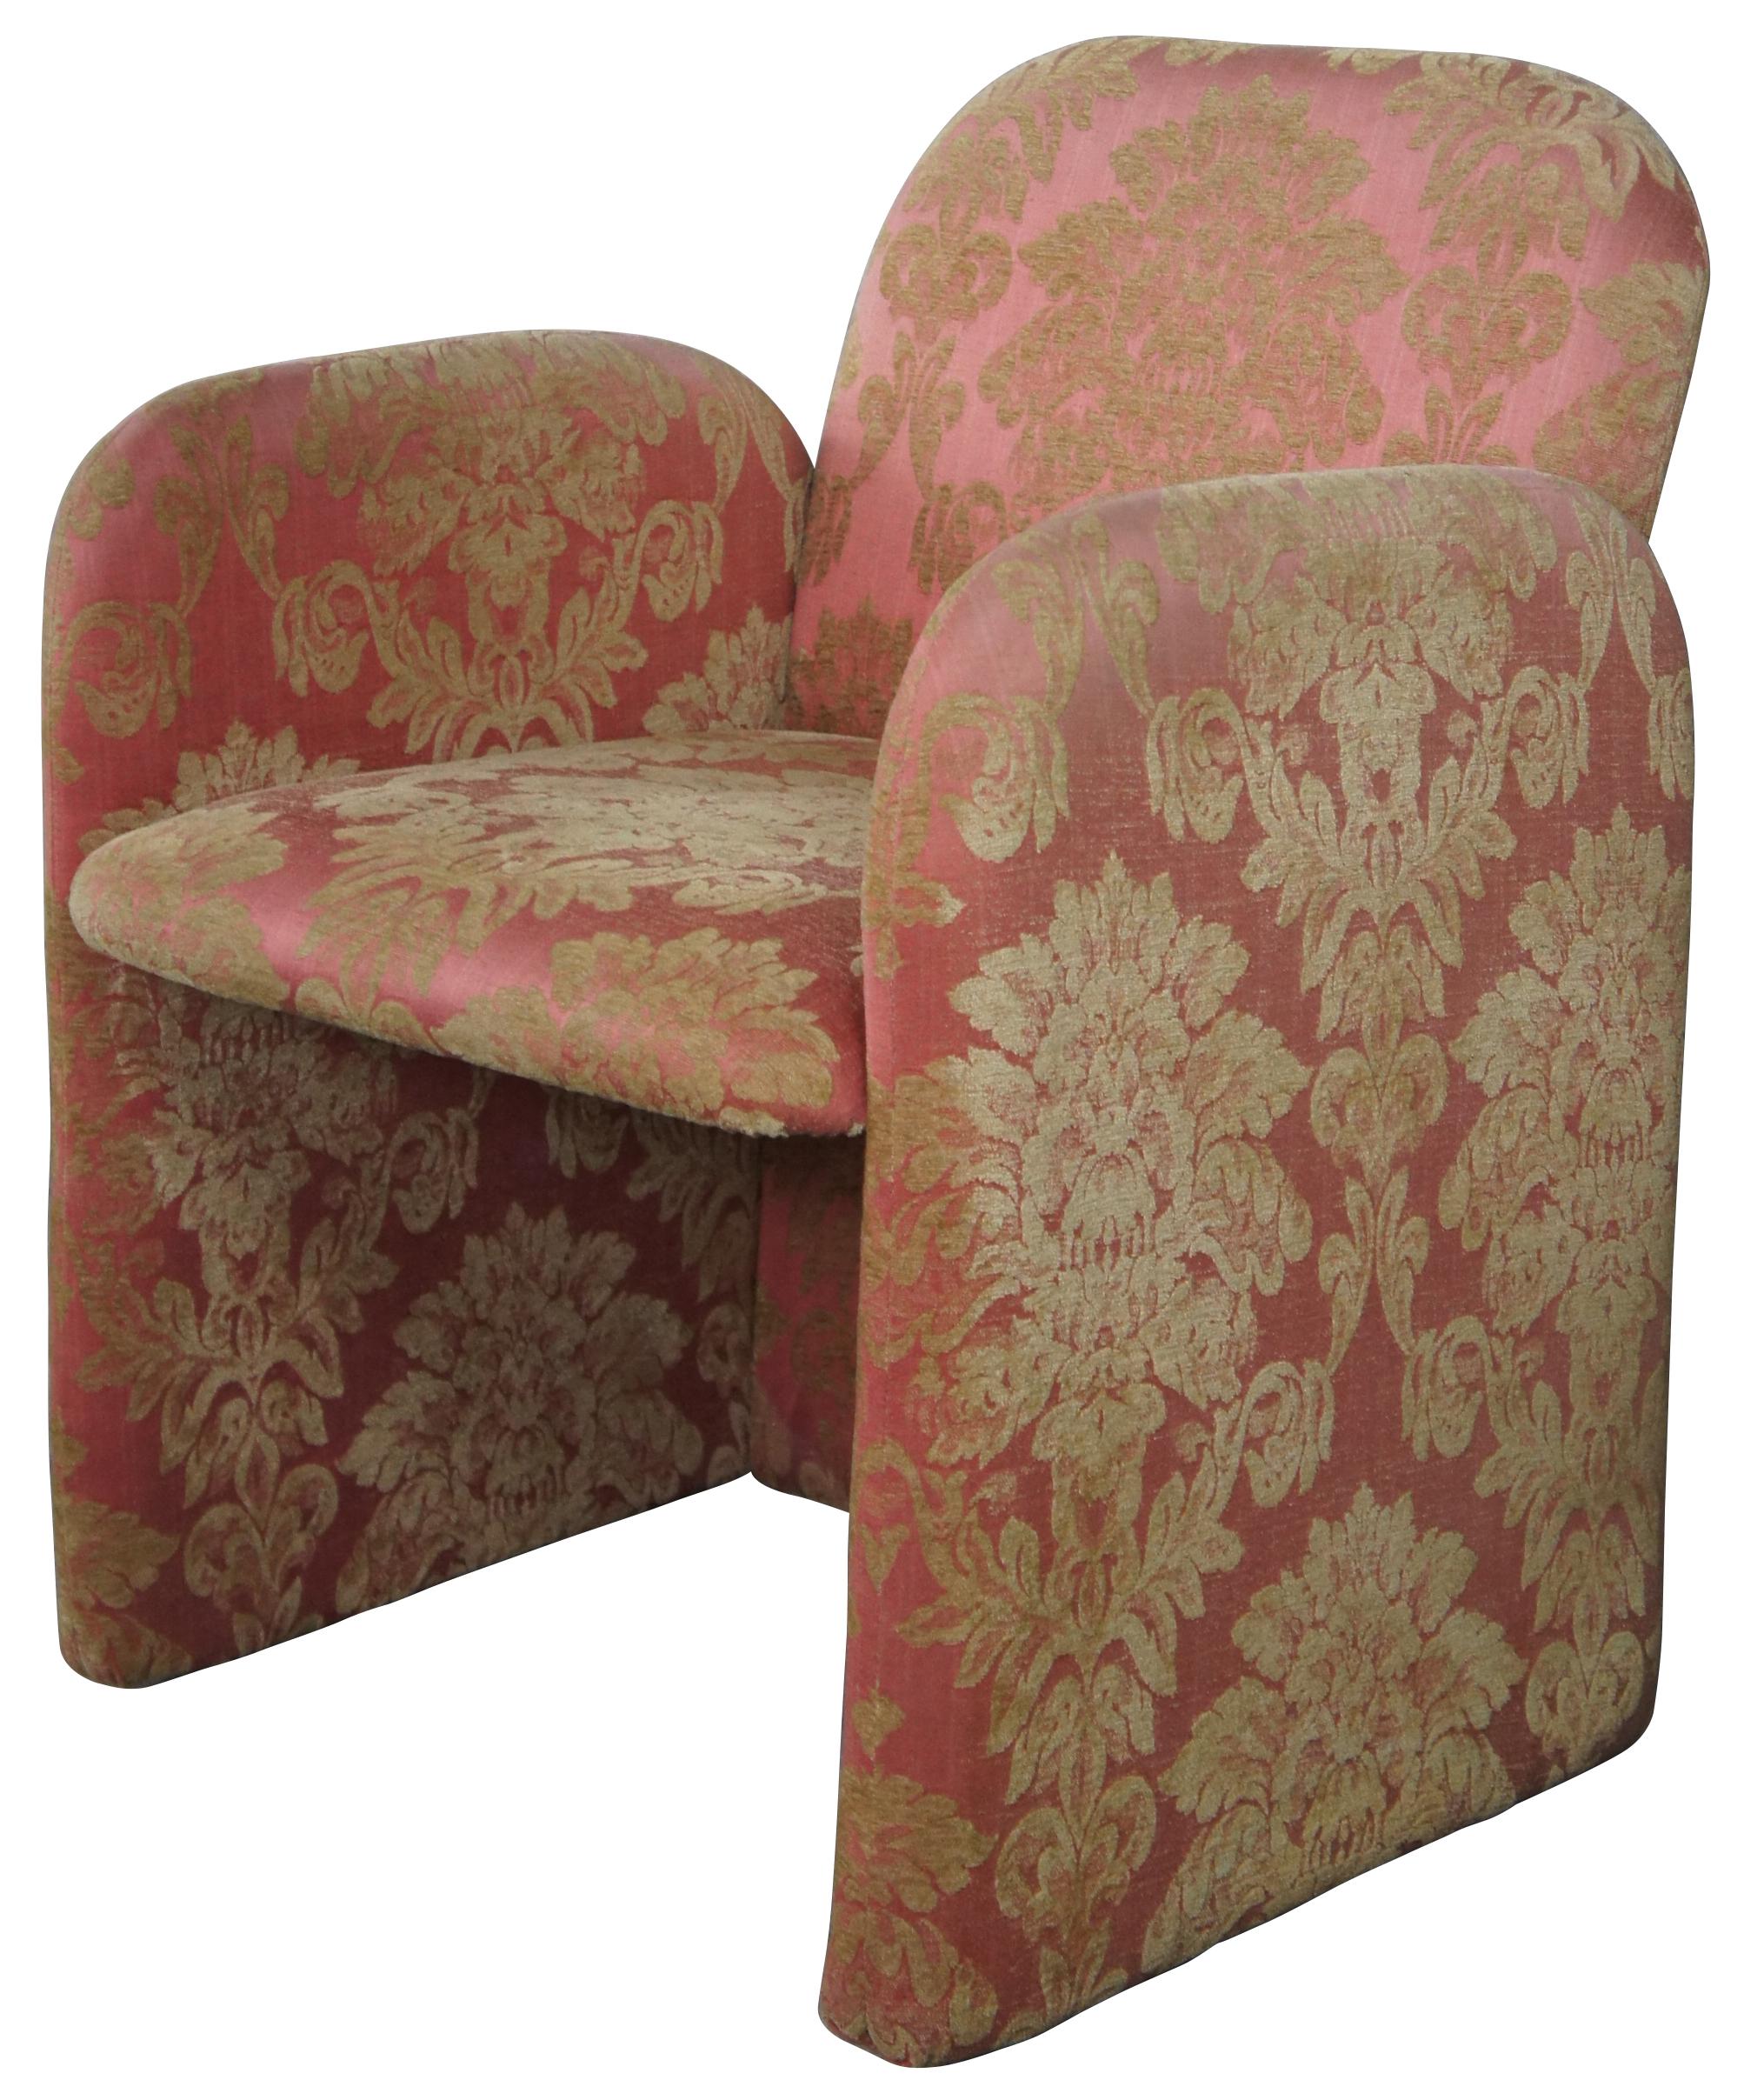 4 Post Modern Chiclet Dining or Game Arm Chairs on Wheels Brocade Fabric Cubic In Good Condition In Dayton, OH